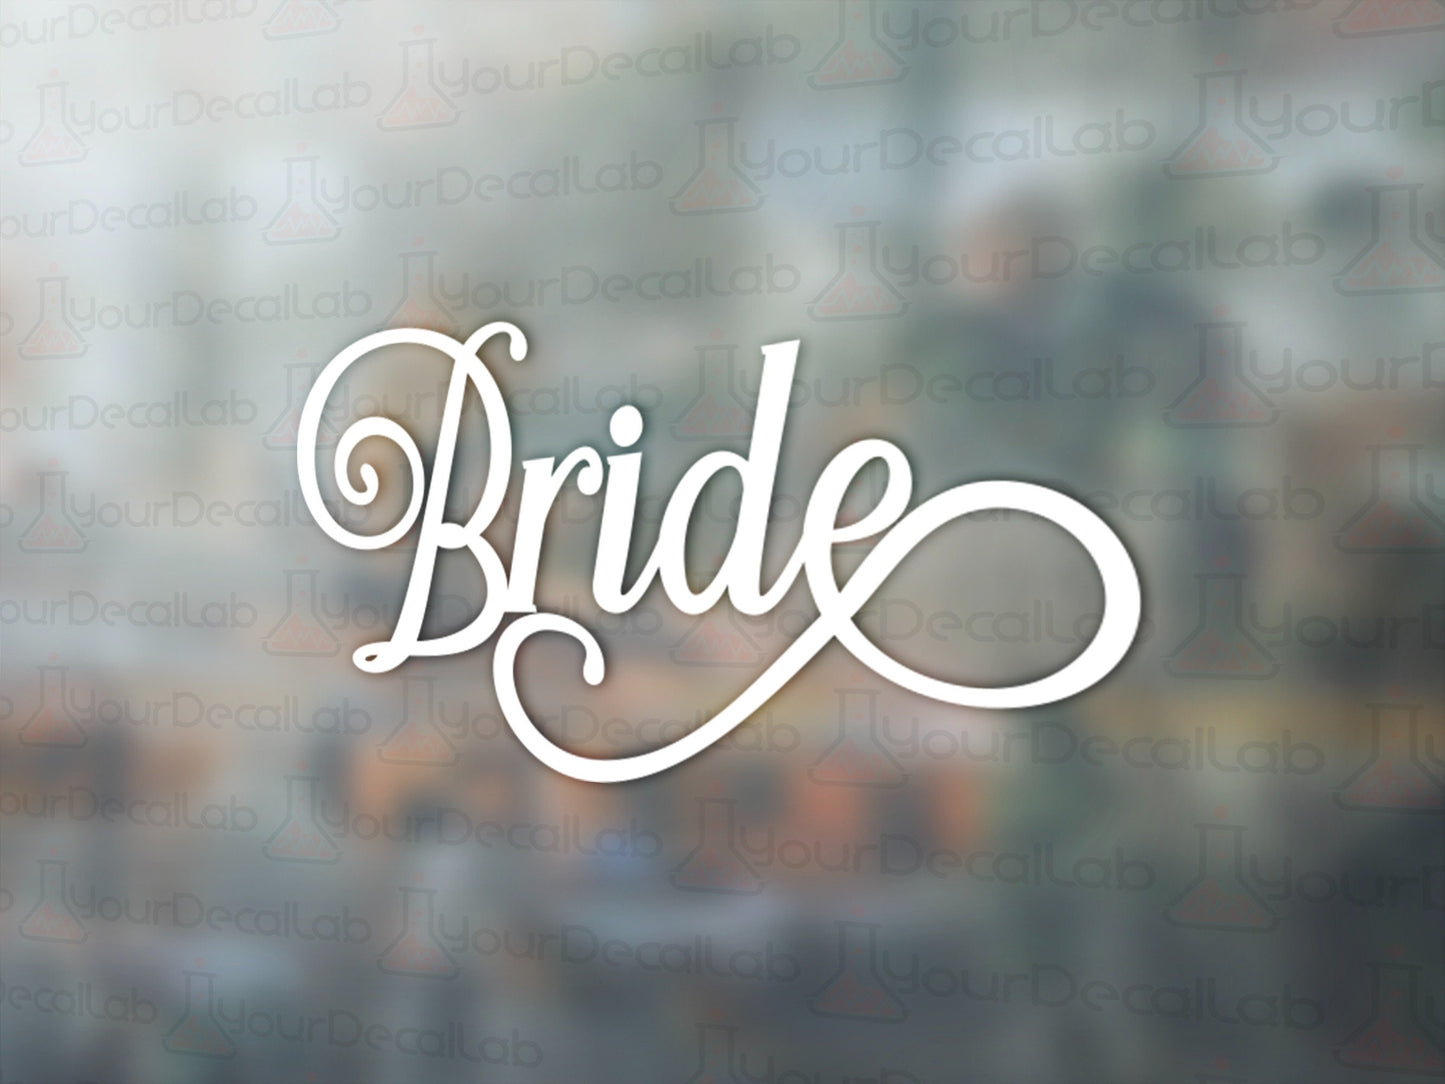 Bride Wedding Decal - Many Colors & Sizes